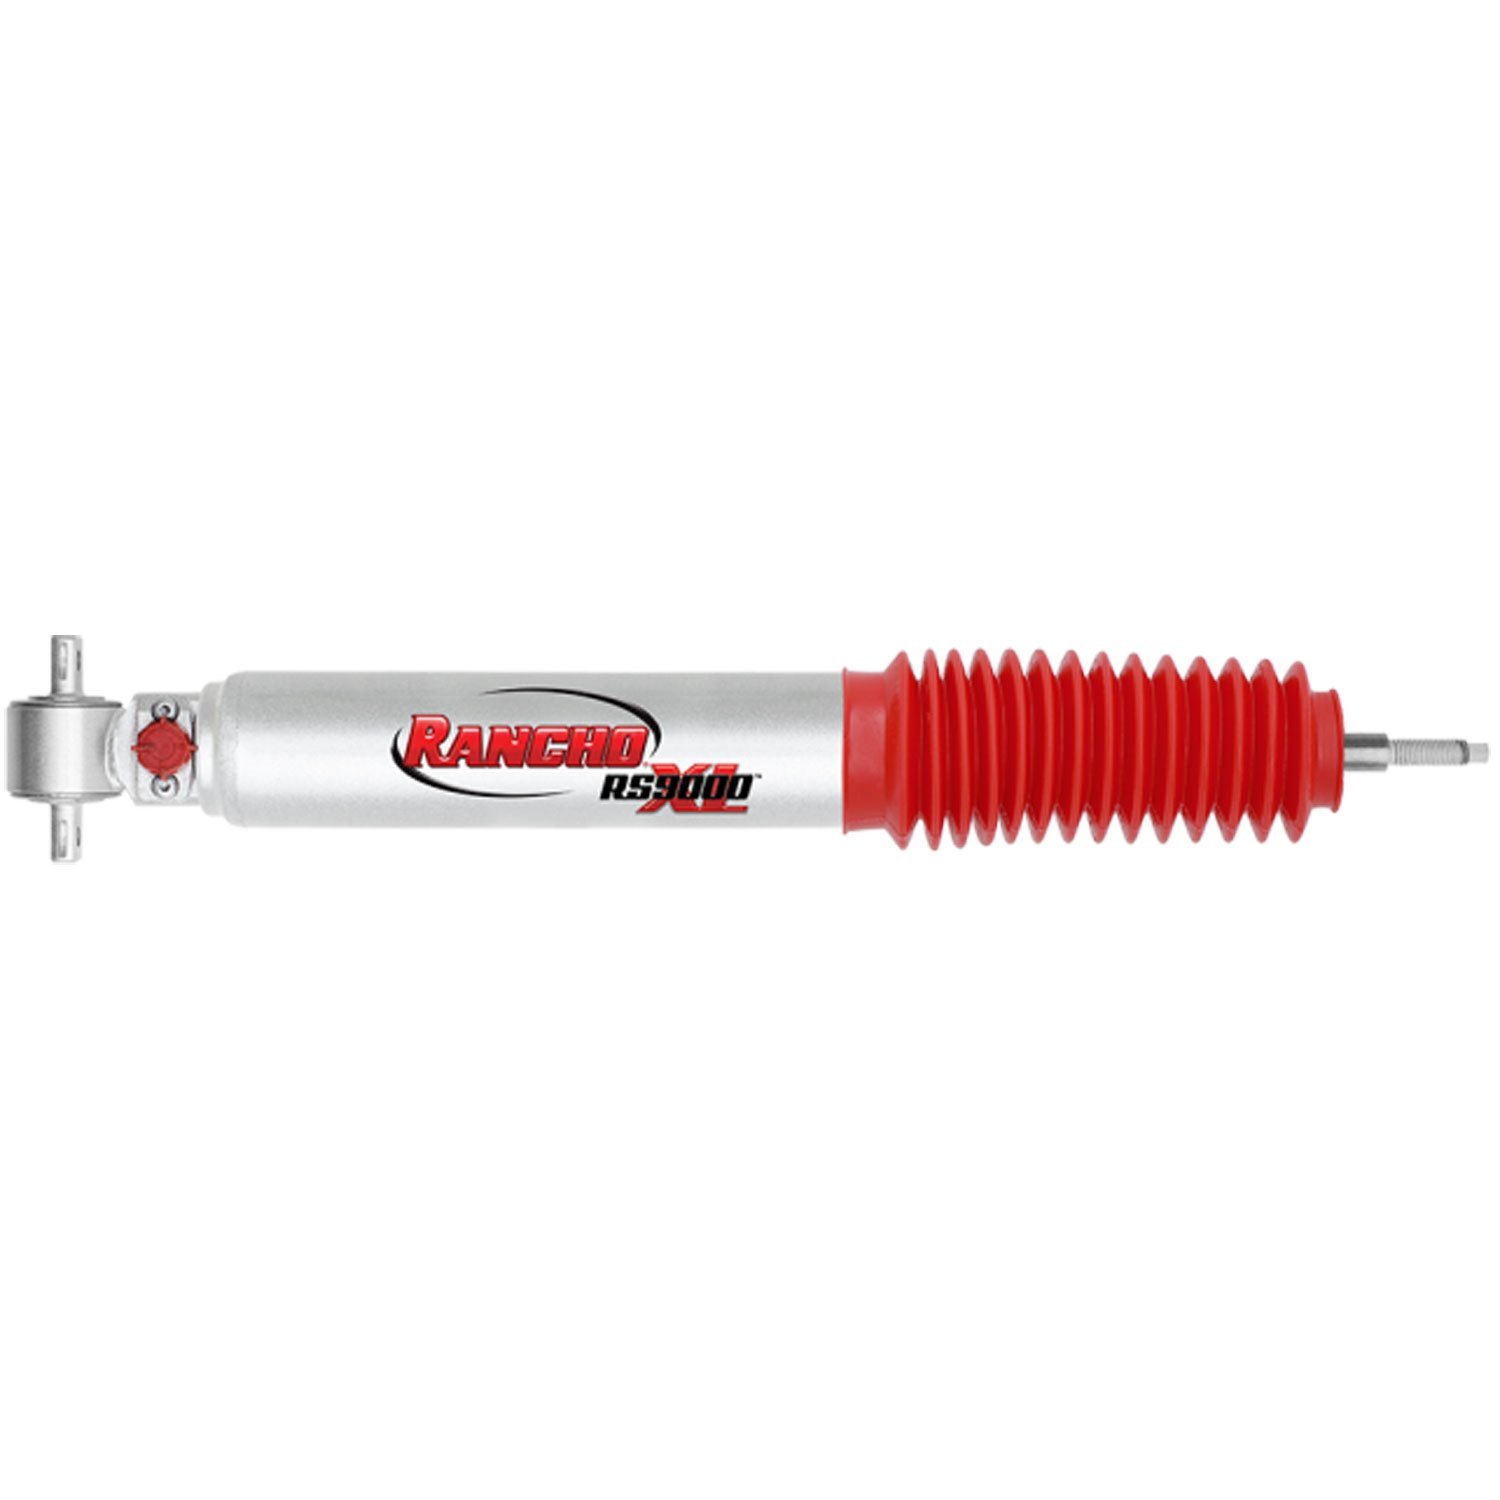 RS9000XL Front Shock Absorber Fits Ford Explorer, Explorer Sport, Explorer Sport Trac and Ranger